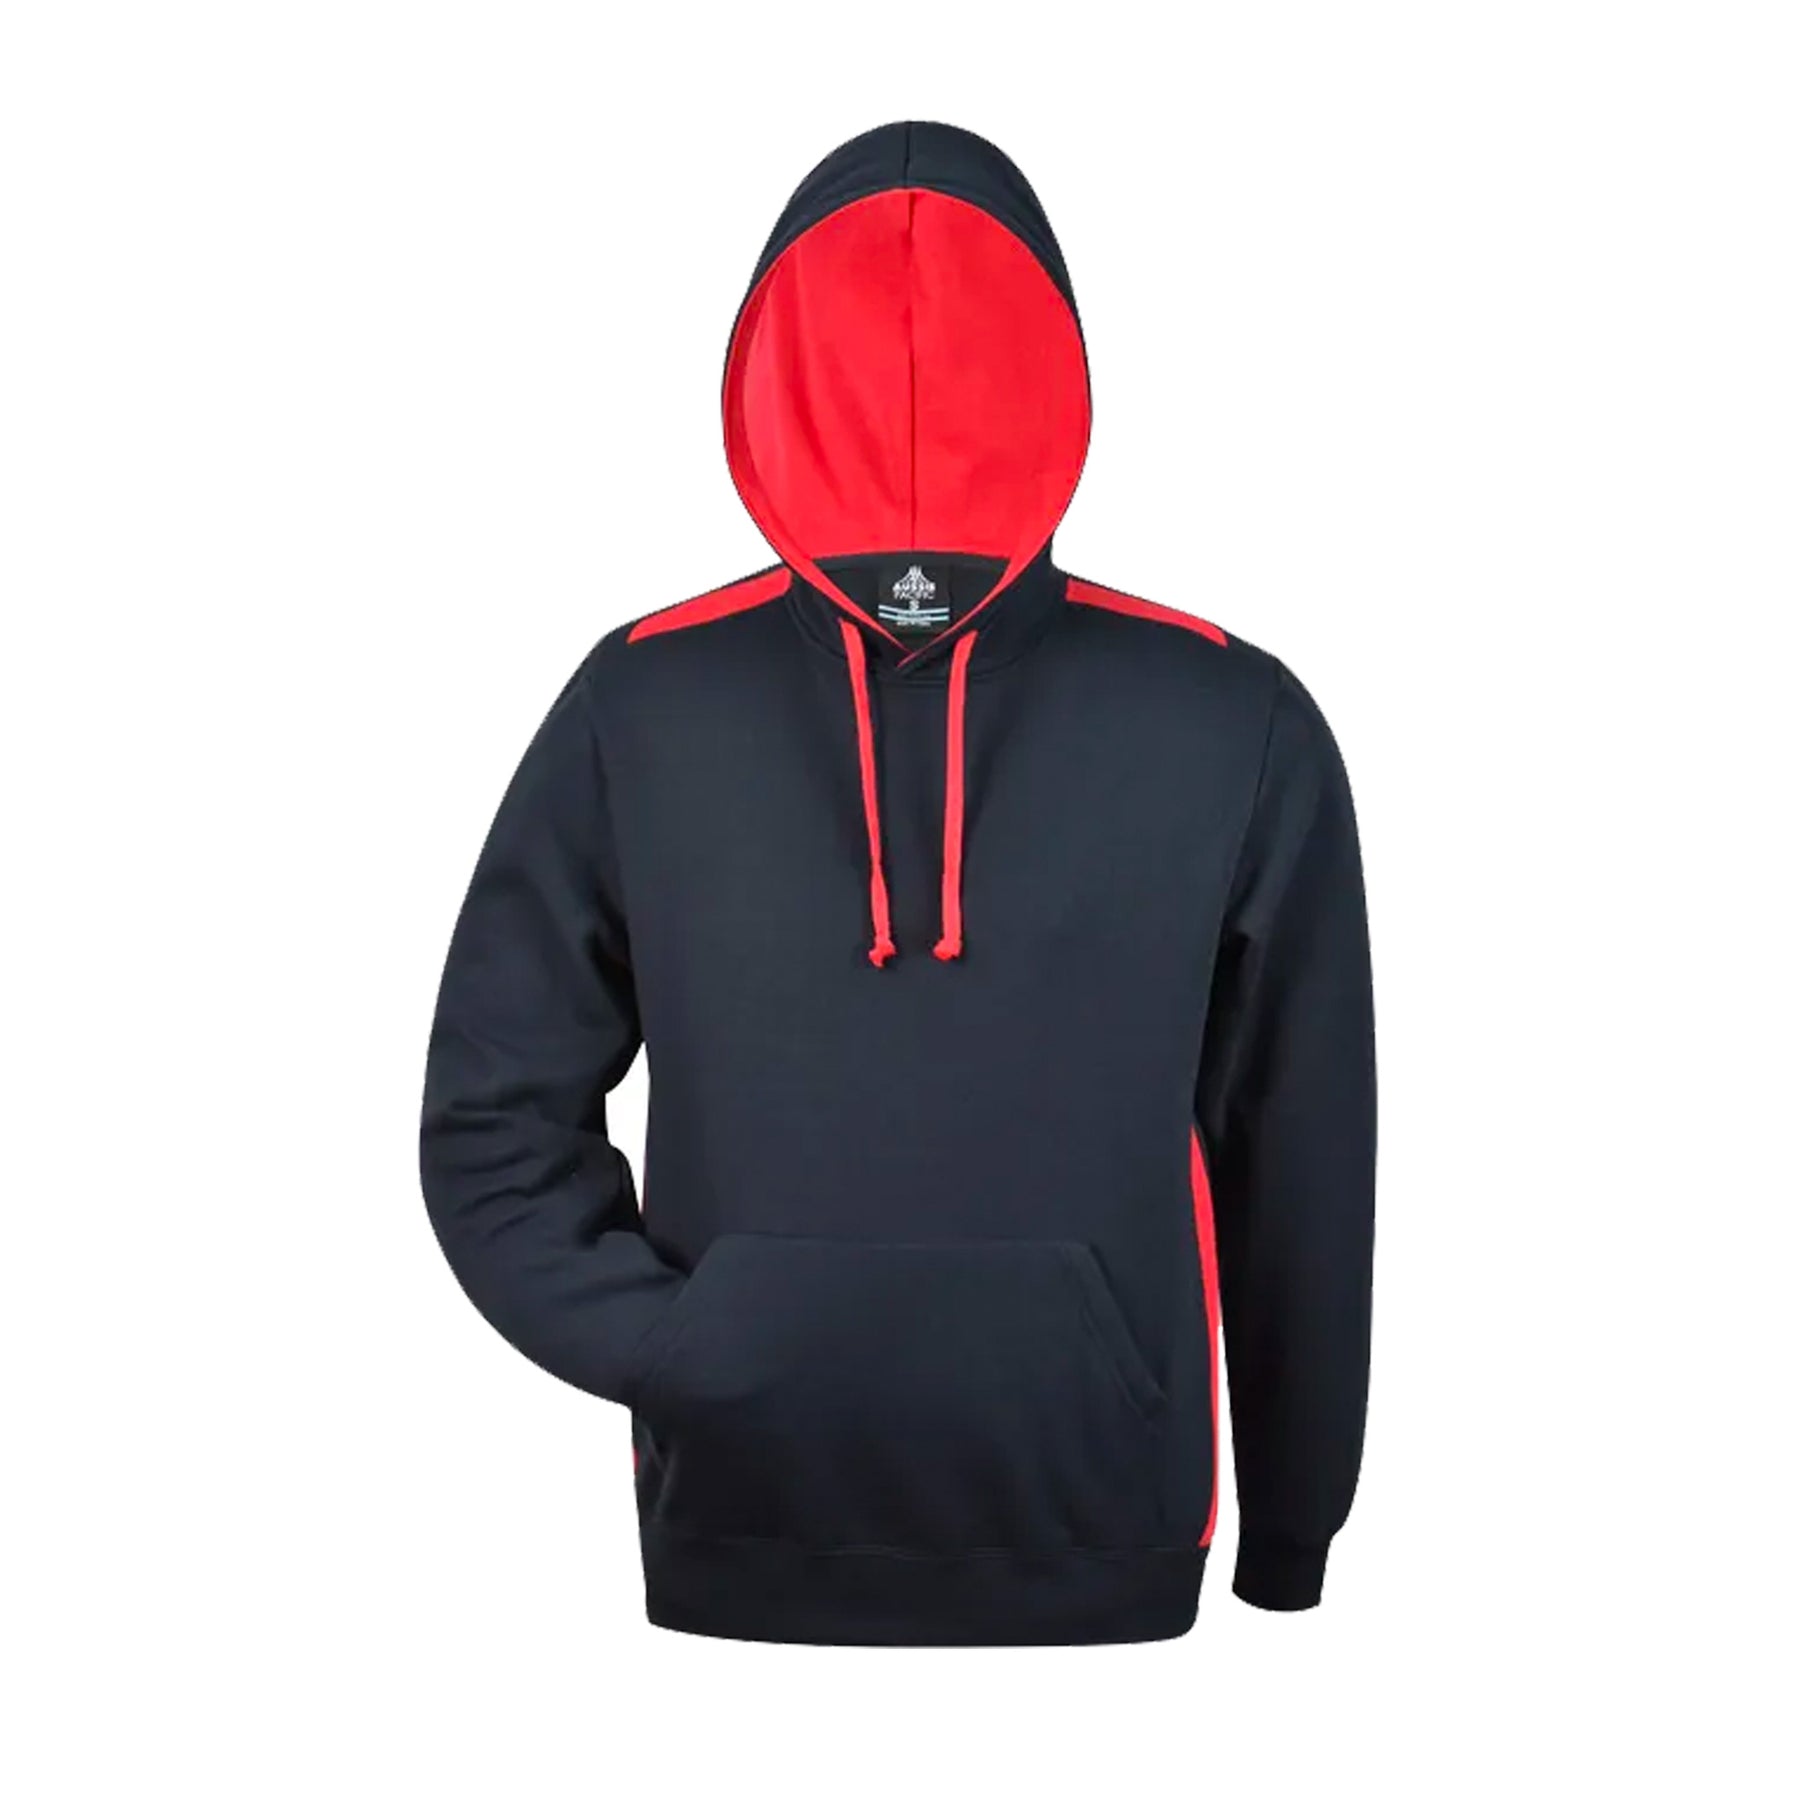 aussie pacific paterson mens hoodies in navy red